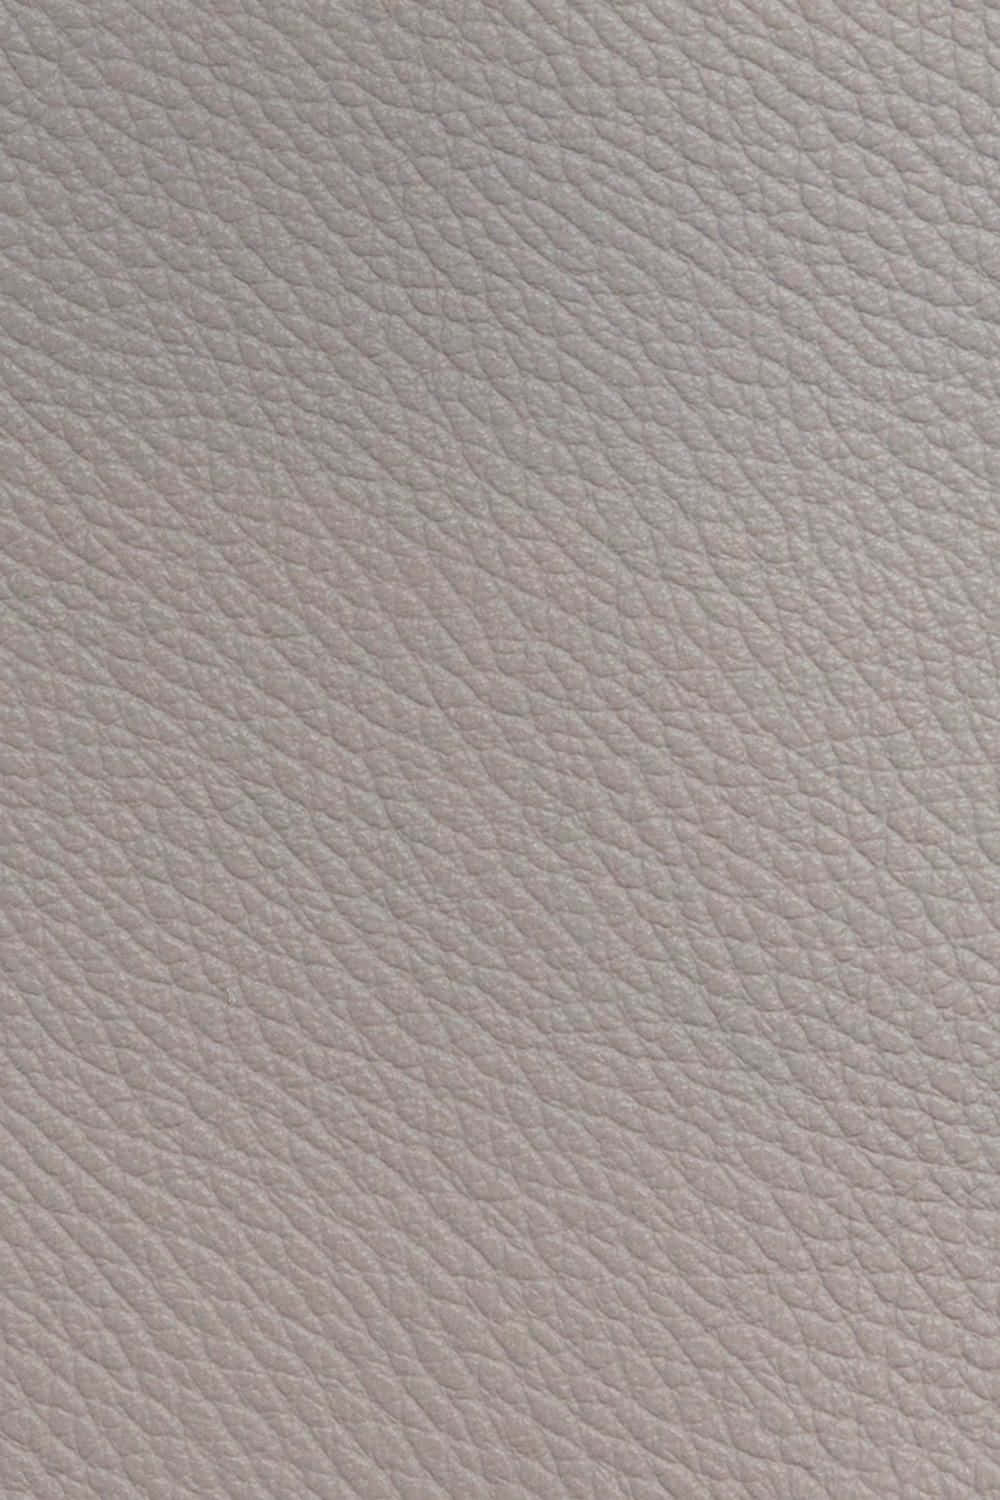 Natural Light Grey Leather Texture Picture